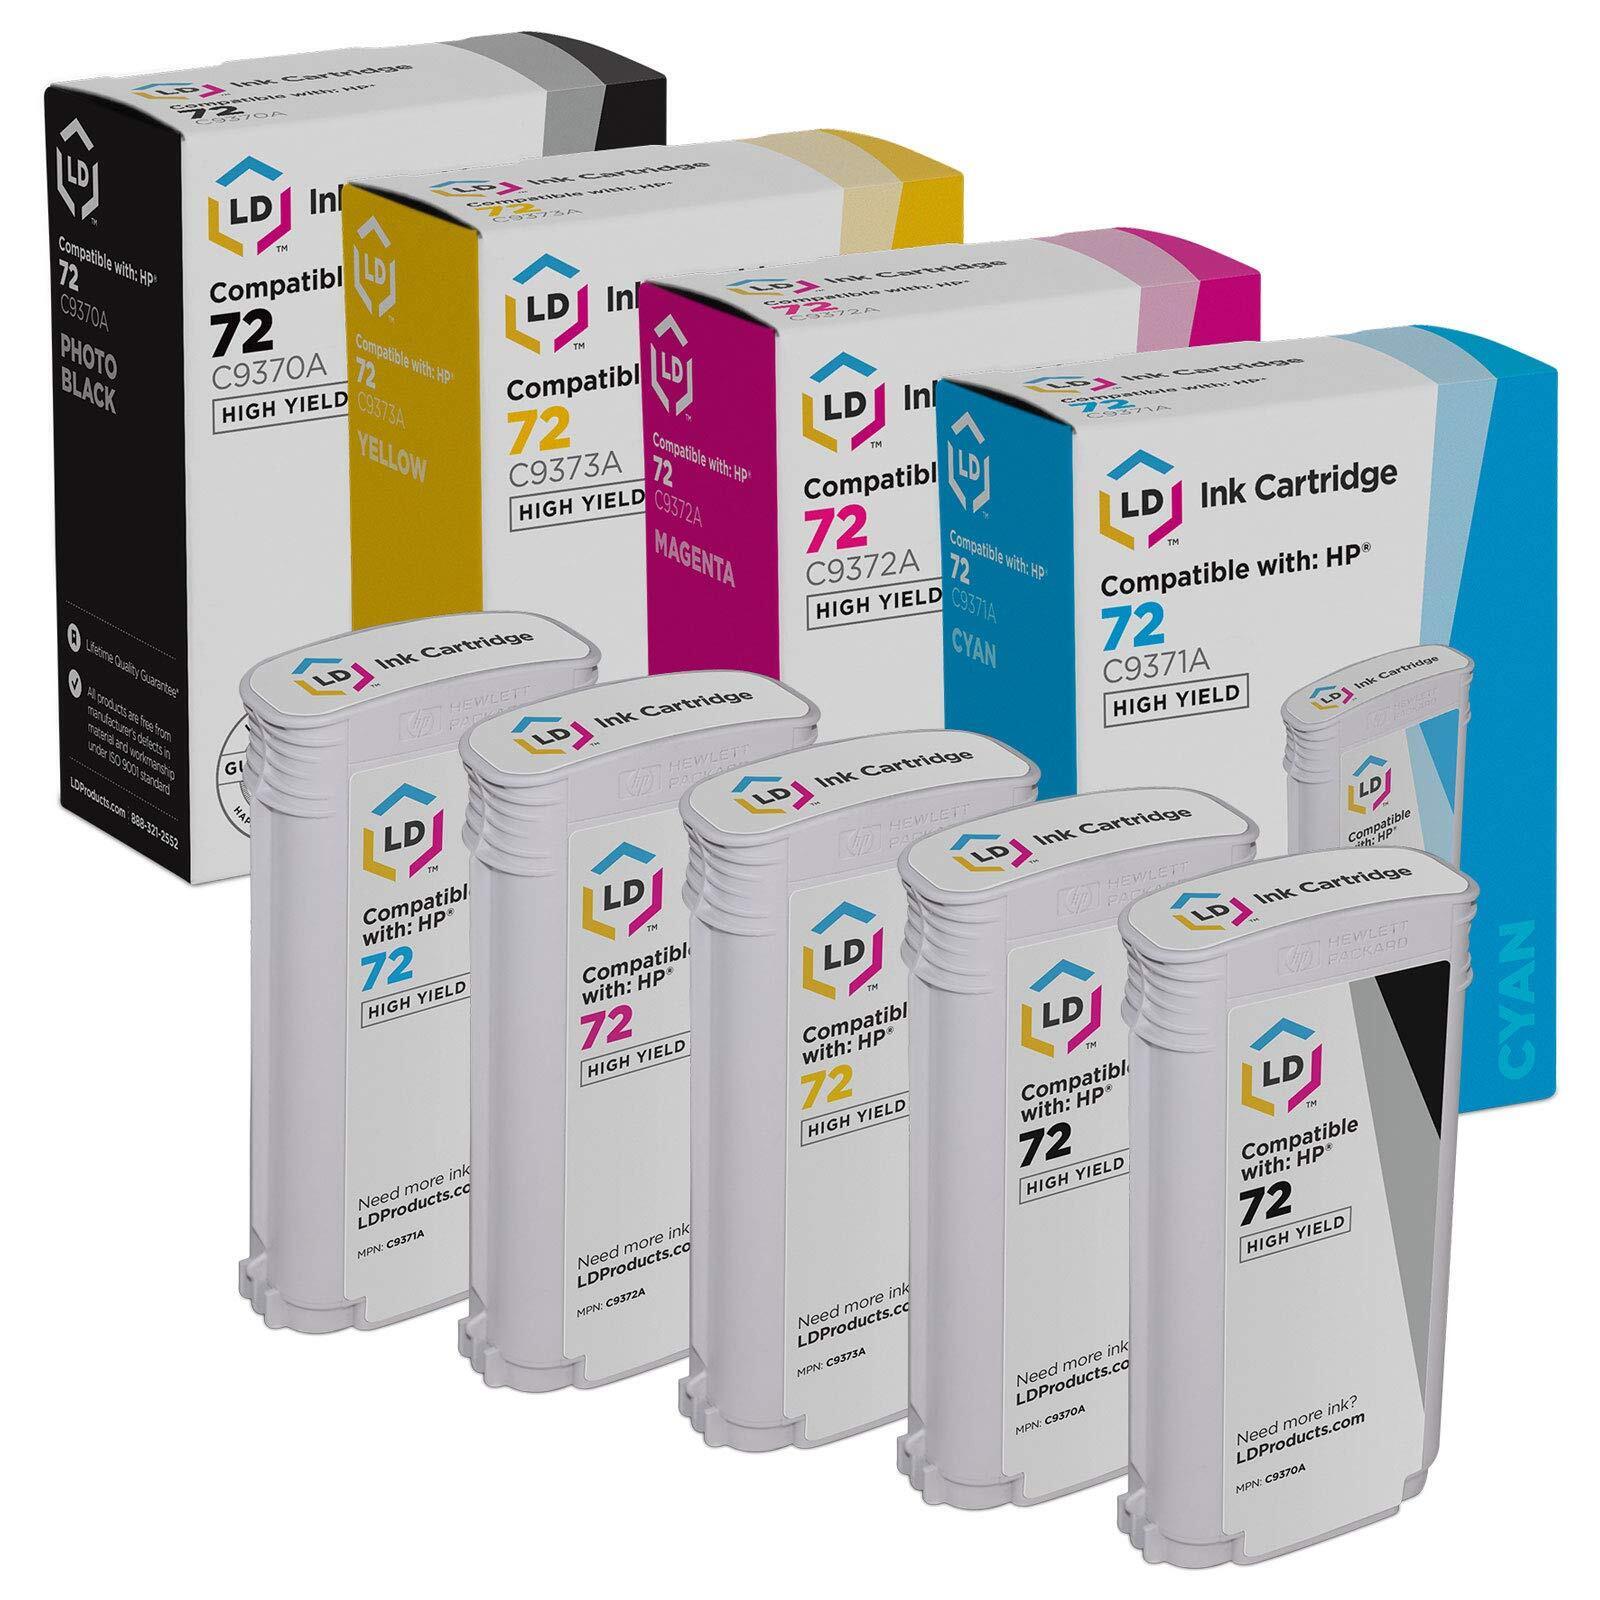 LD 5PK Replacement Fits for HP 72 Ink Cartridges Photo Black Cyan Magenta Yellow